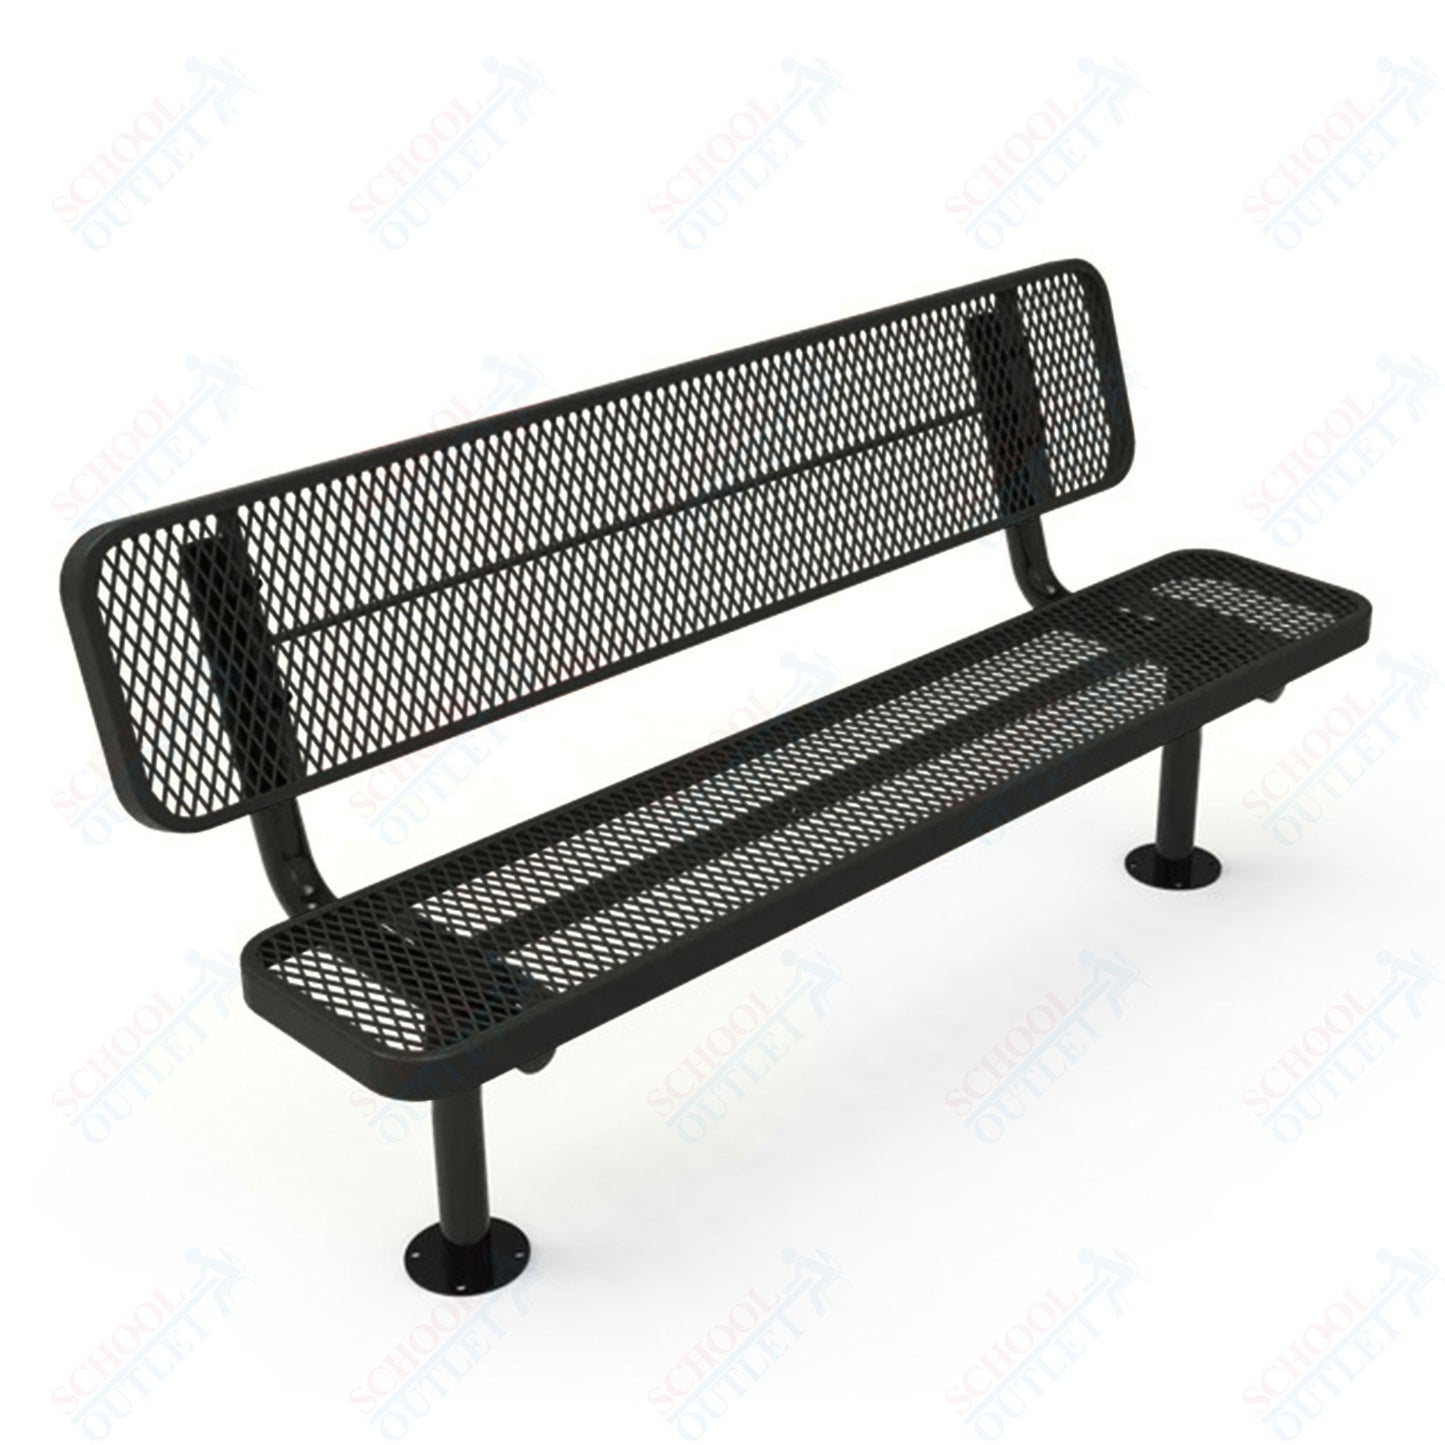 MyTcoat - Player's Outdoor Bench with Back - Surface Mount 6' L (MYT-BPY06-32)